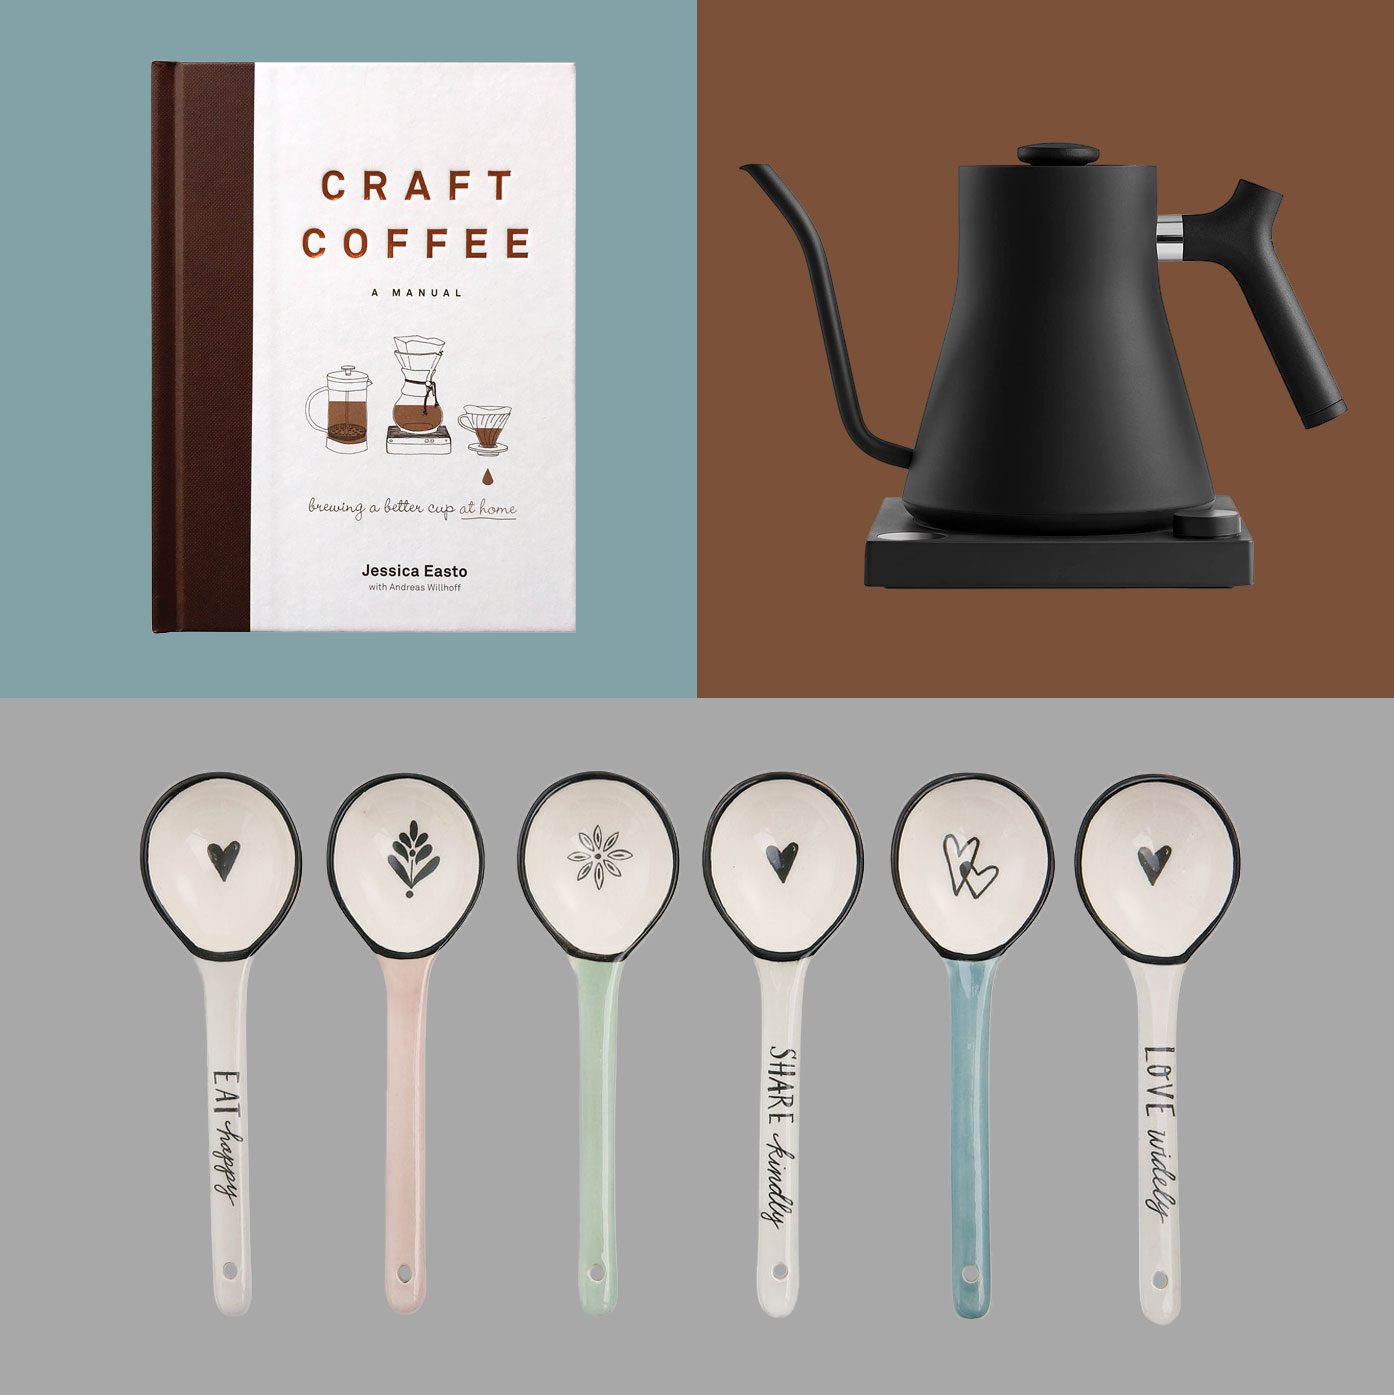 39 Gifts For Coffee Lovers 2022 — Coffee Gifts for Everyone on Your List